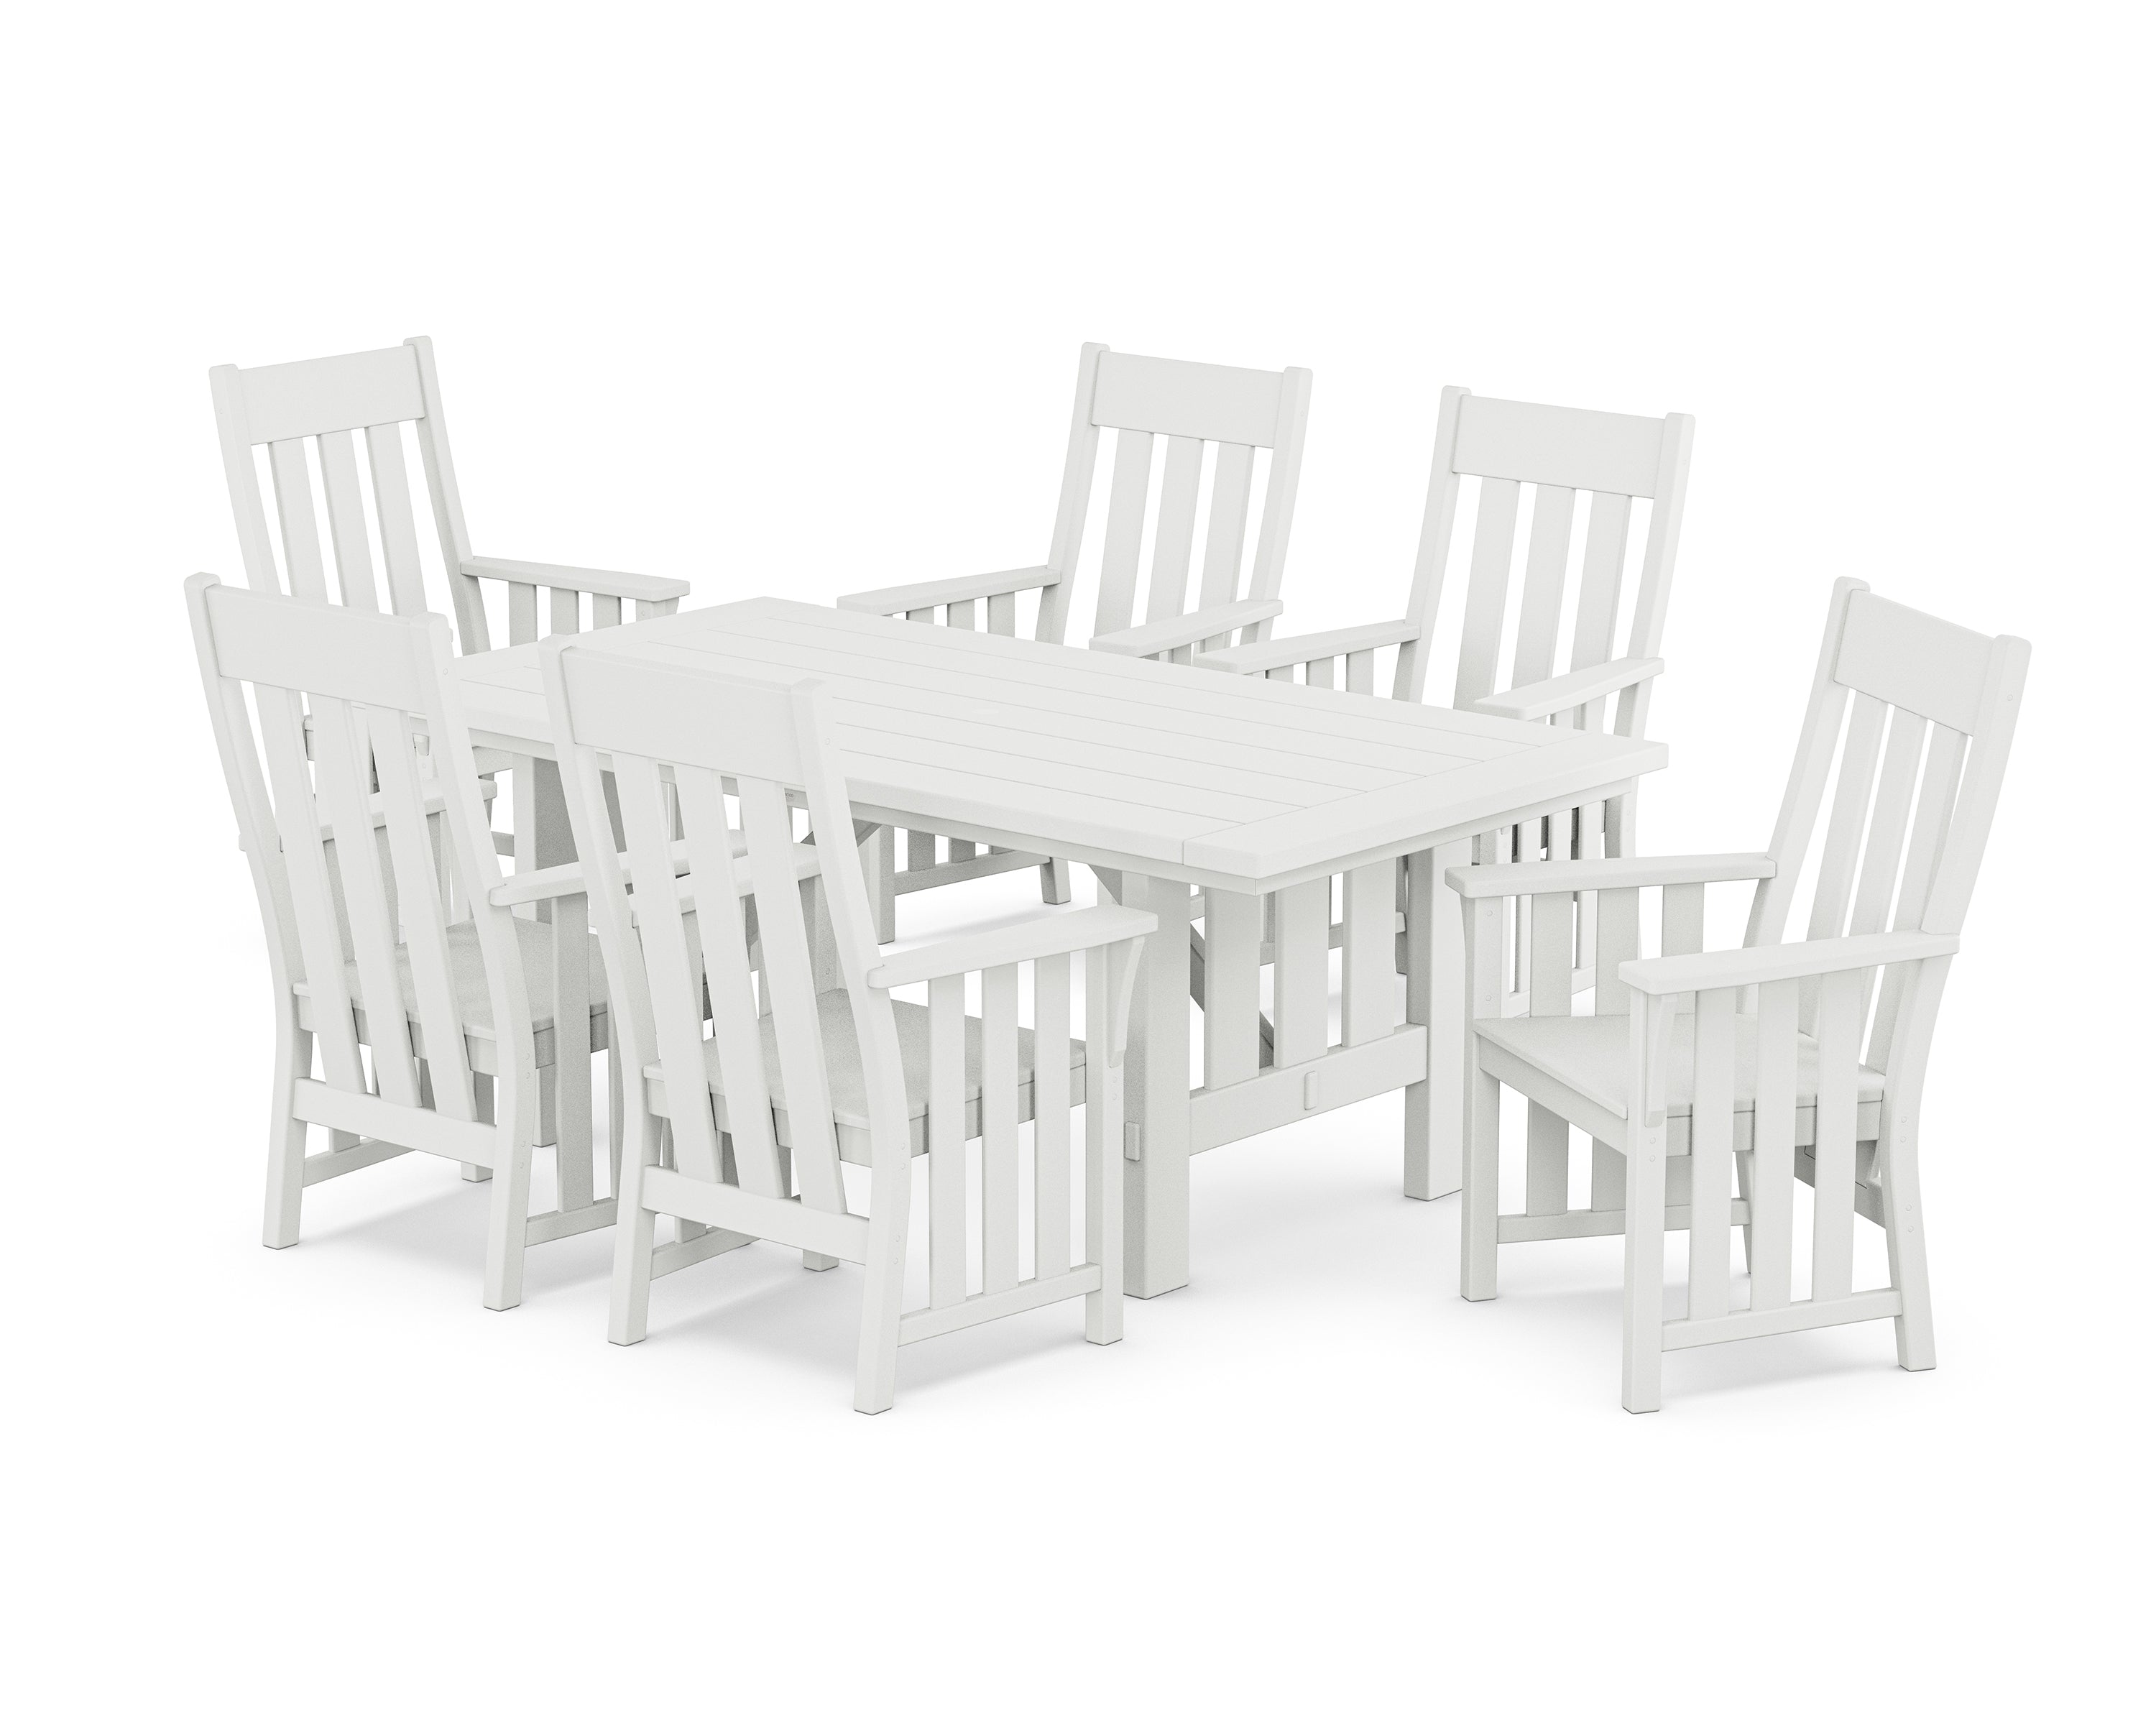 Martha Stewart by POLYWOOD® Acadia Arm Chair 7-Piece Dining Set in White